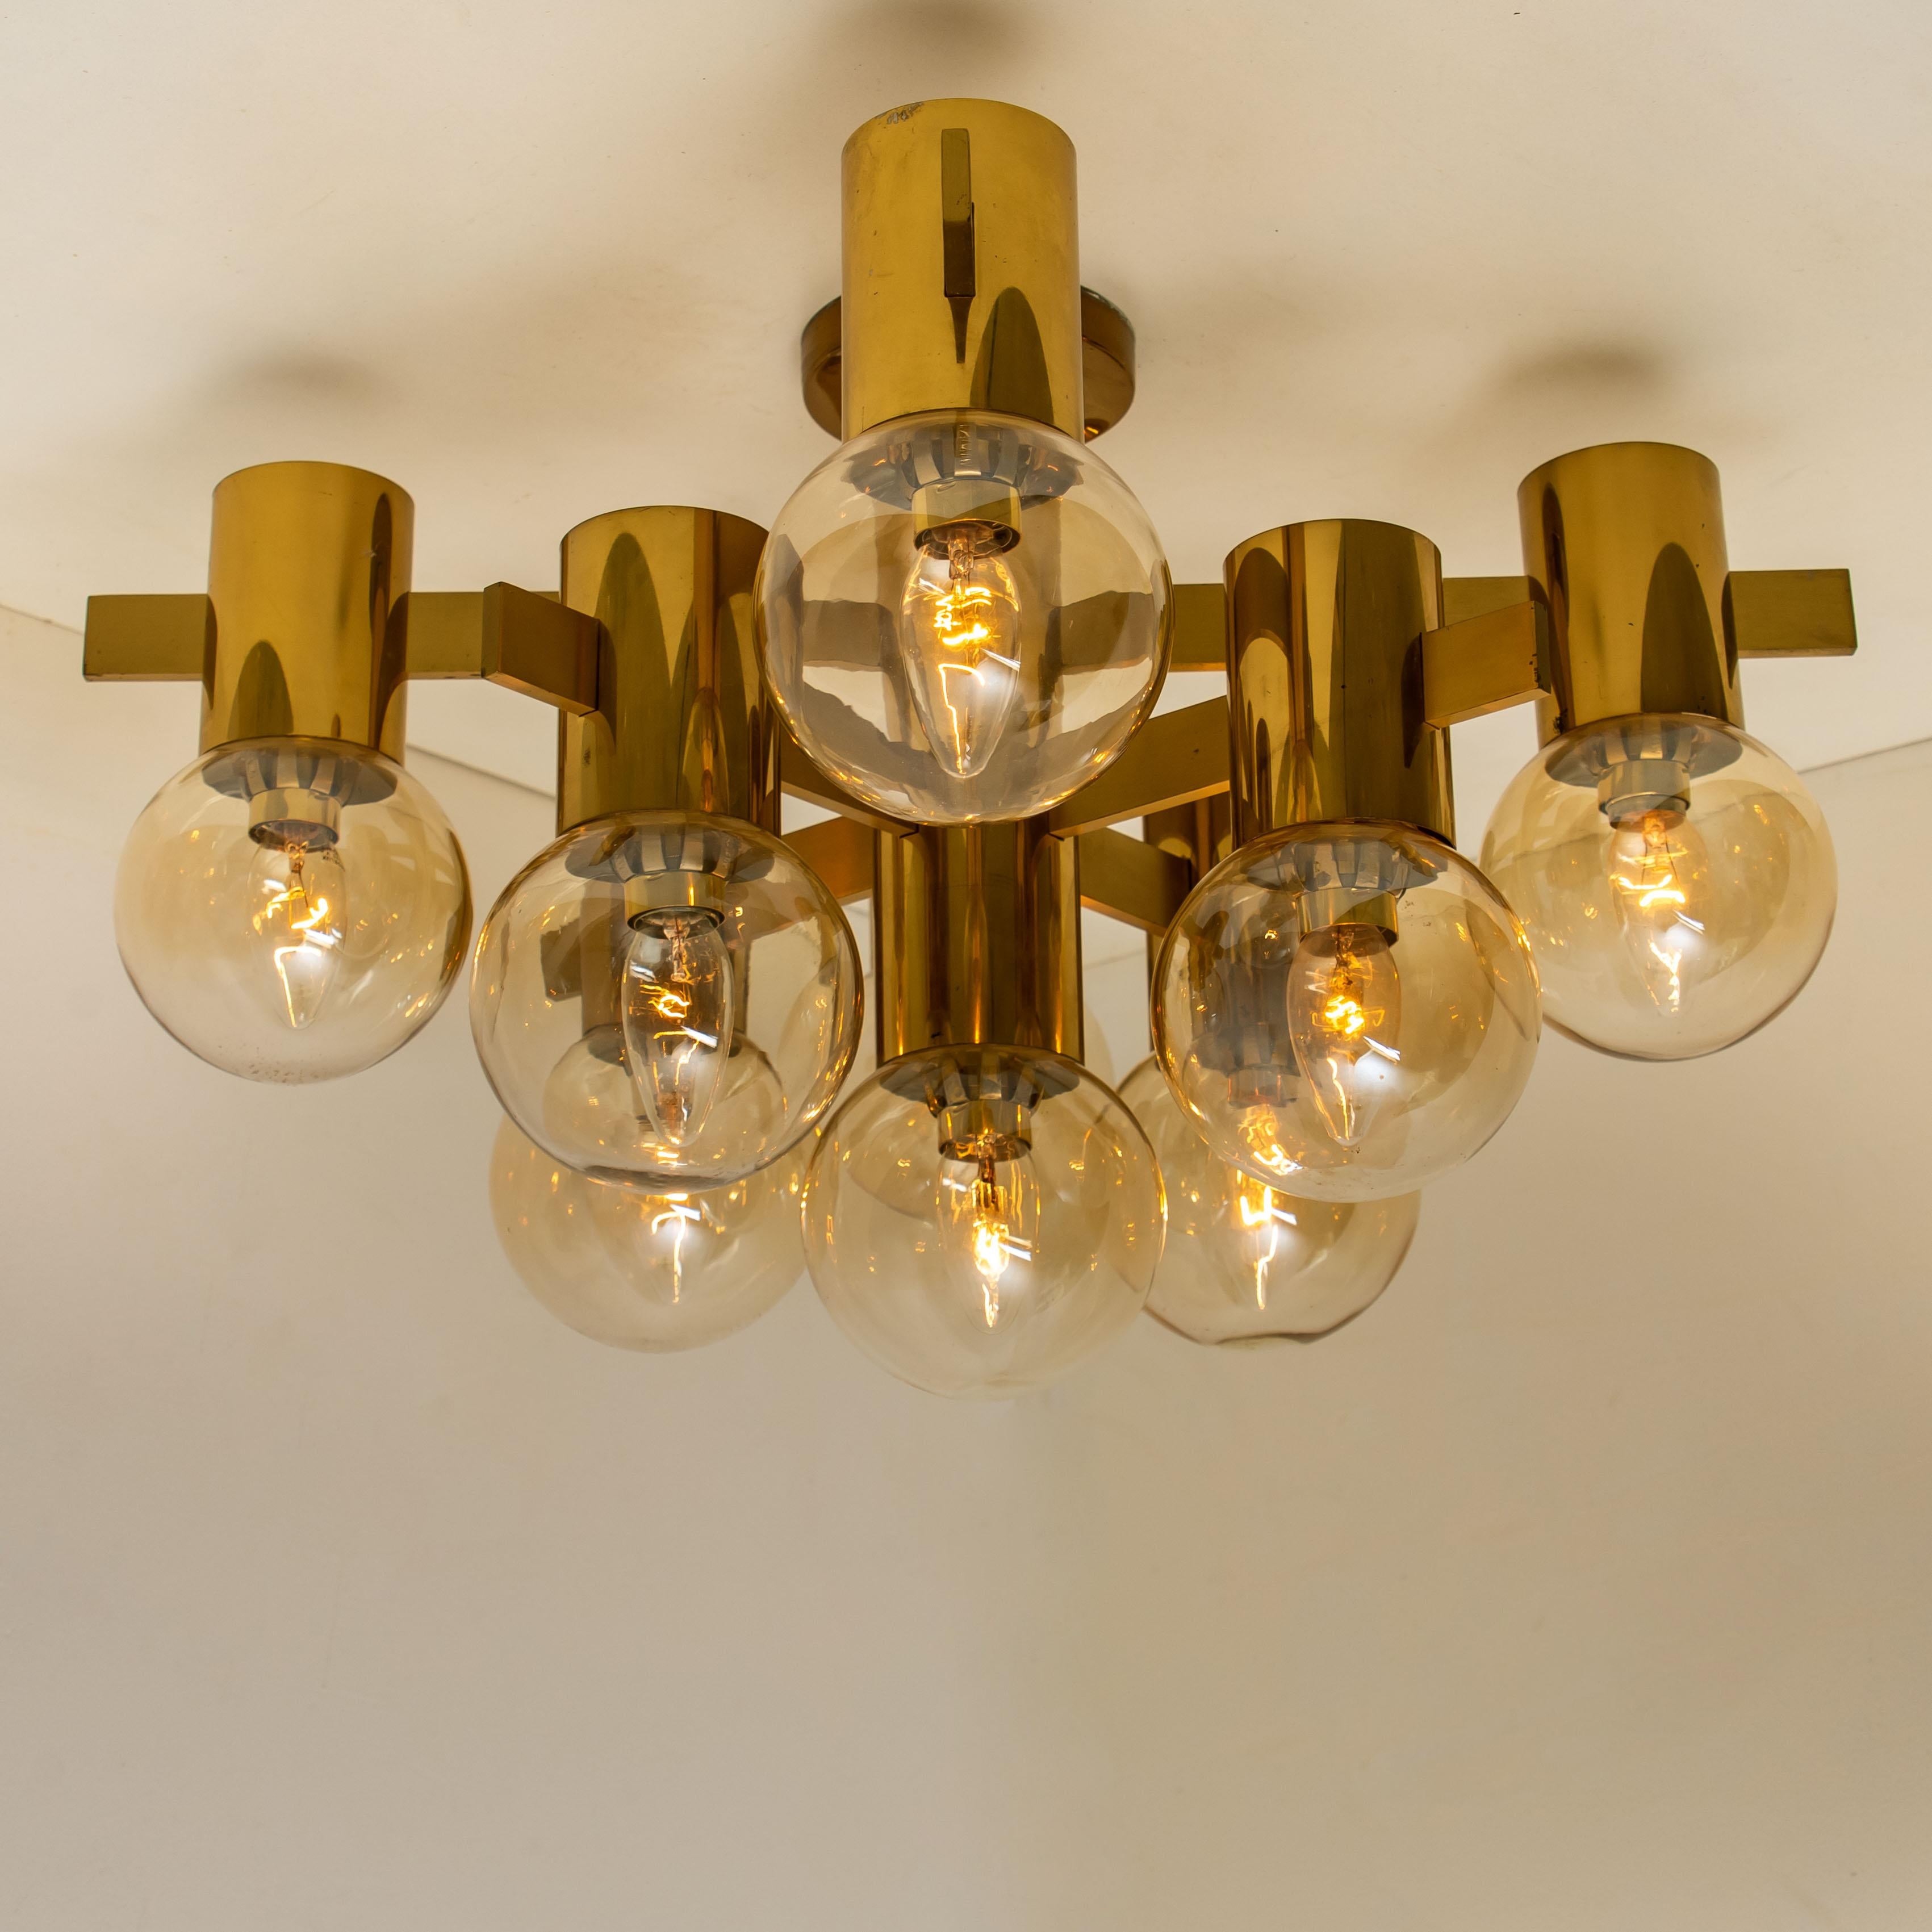 Mid-Century Modern 1 of the 3 Brass and Glass Light Fixtures in the Style of Jakobsson, 1960s For Sale